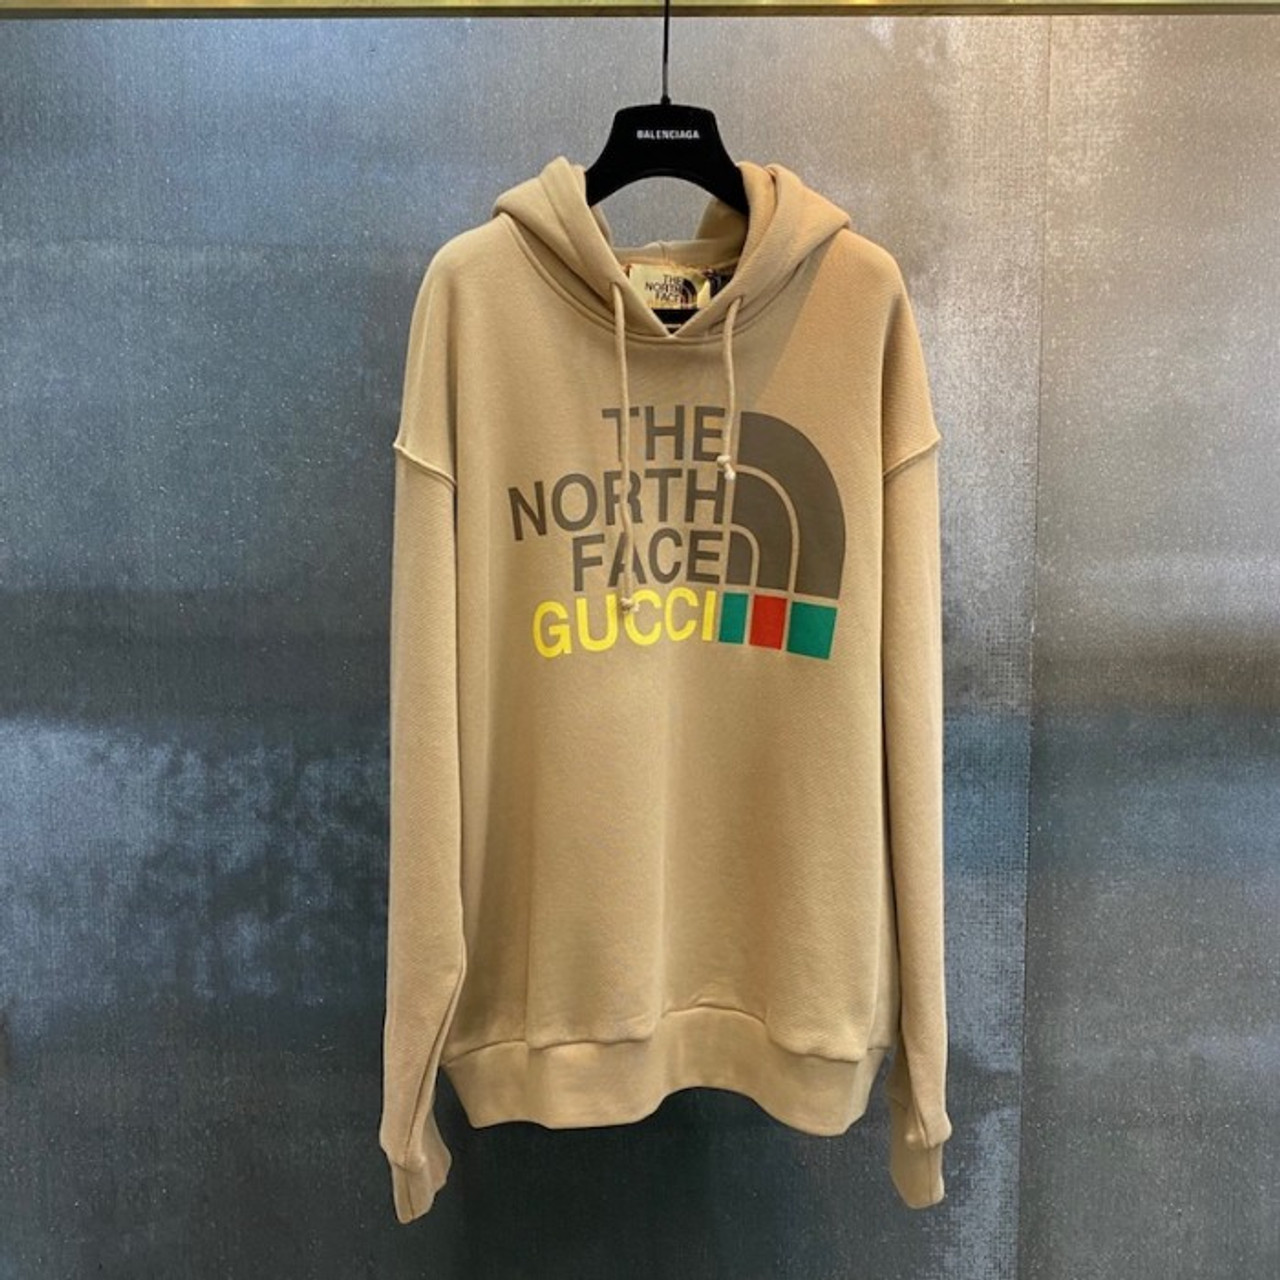 momentum efterligne Sløset where to buy the best stockX High quality replica UA Gucci x The North Face  Hoodie Hypedripz is the best high quality trusted clone replica fake  designer hypebeast seller website 2021